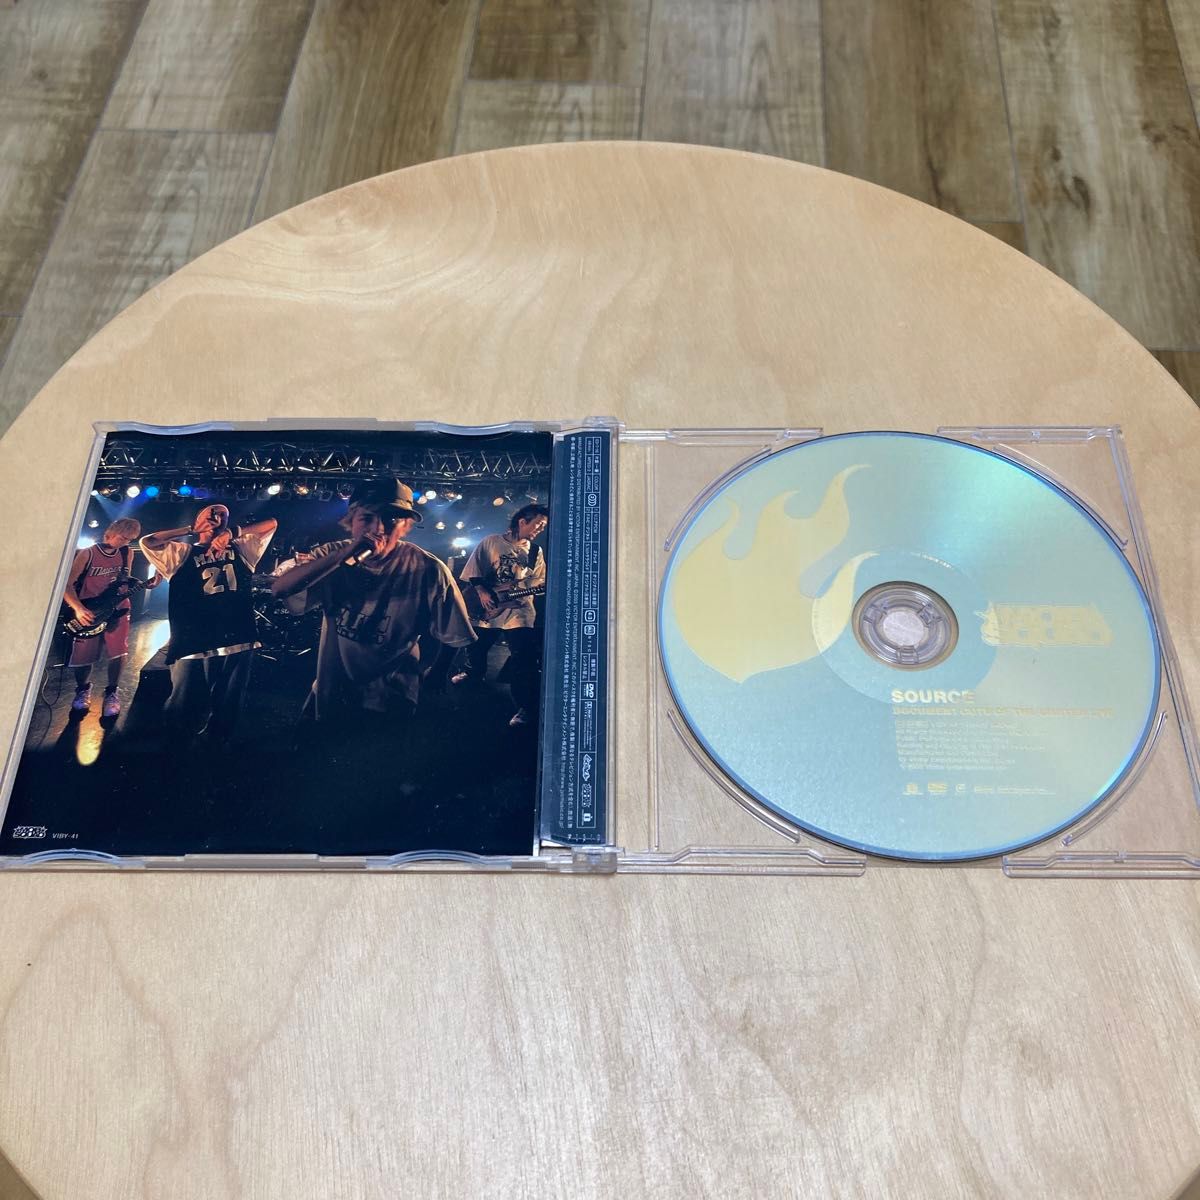 SOURCE Desert Island CD＋ DOCUMENT CUTS OF THE LIMITED LIVE DVD